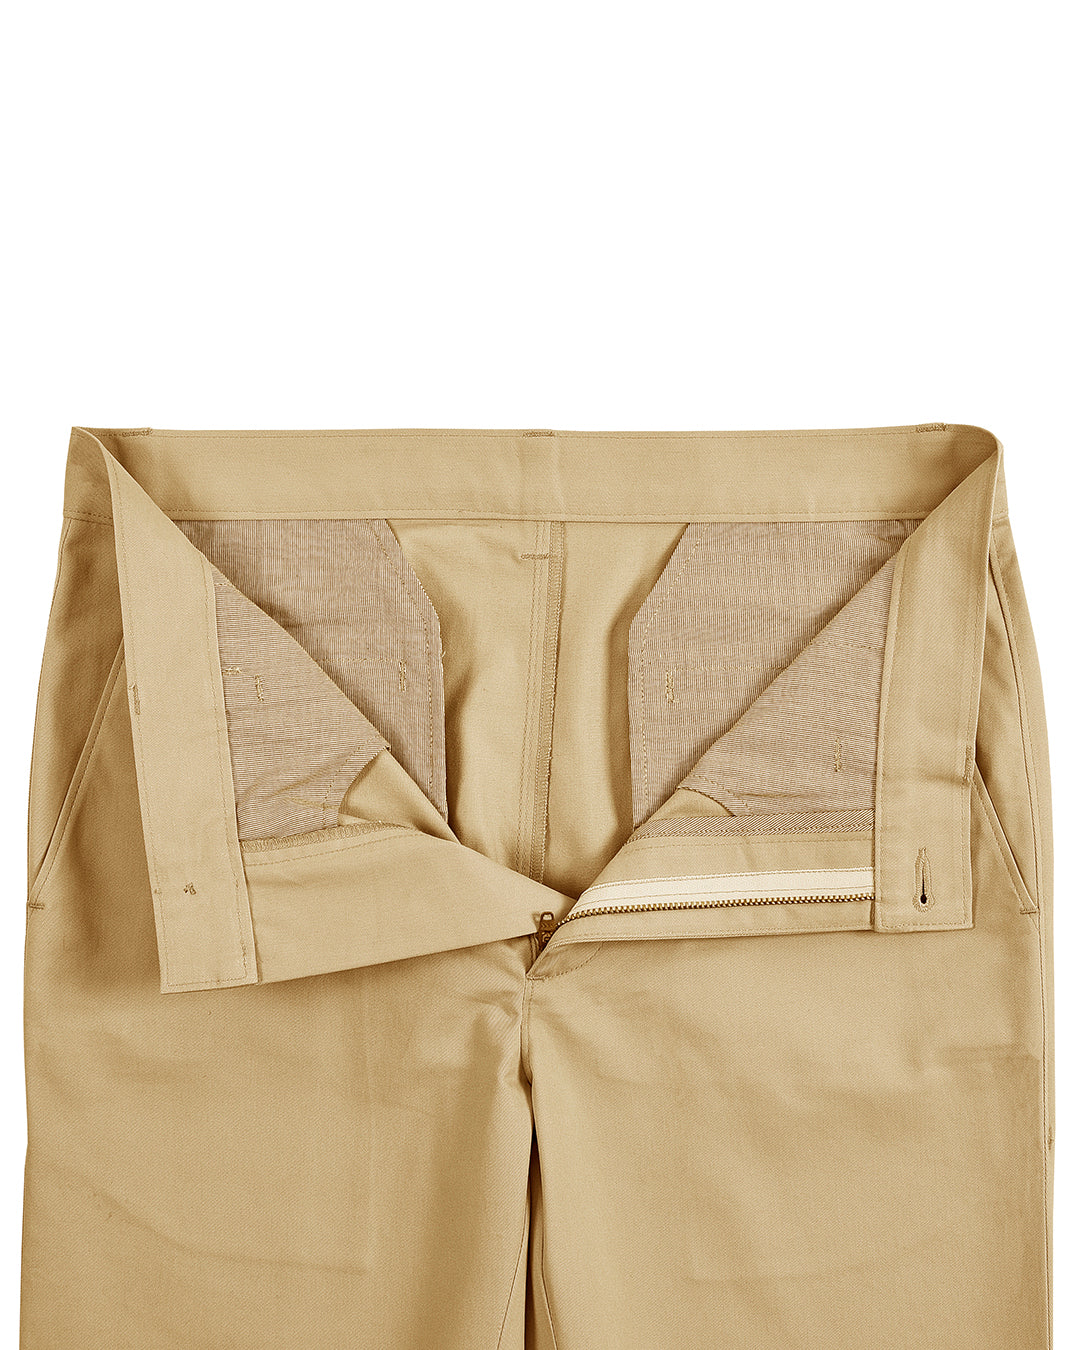 Front open view of custom Genoa Chino pants for men by Luxire in golden corn